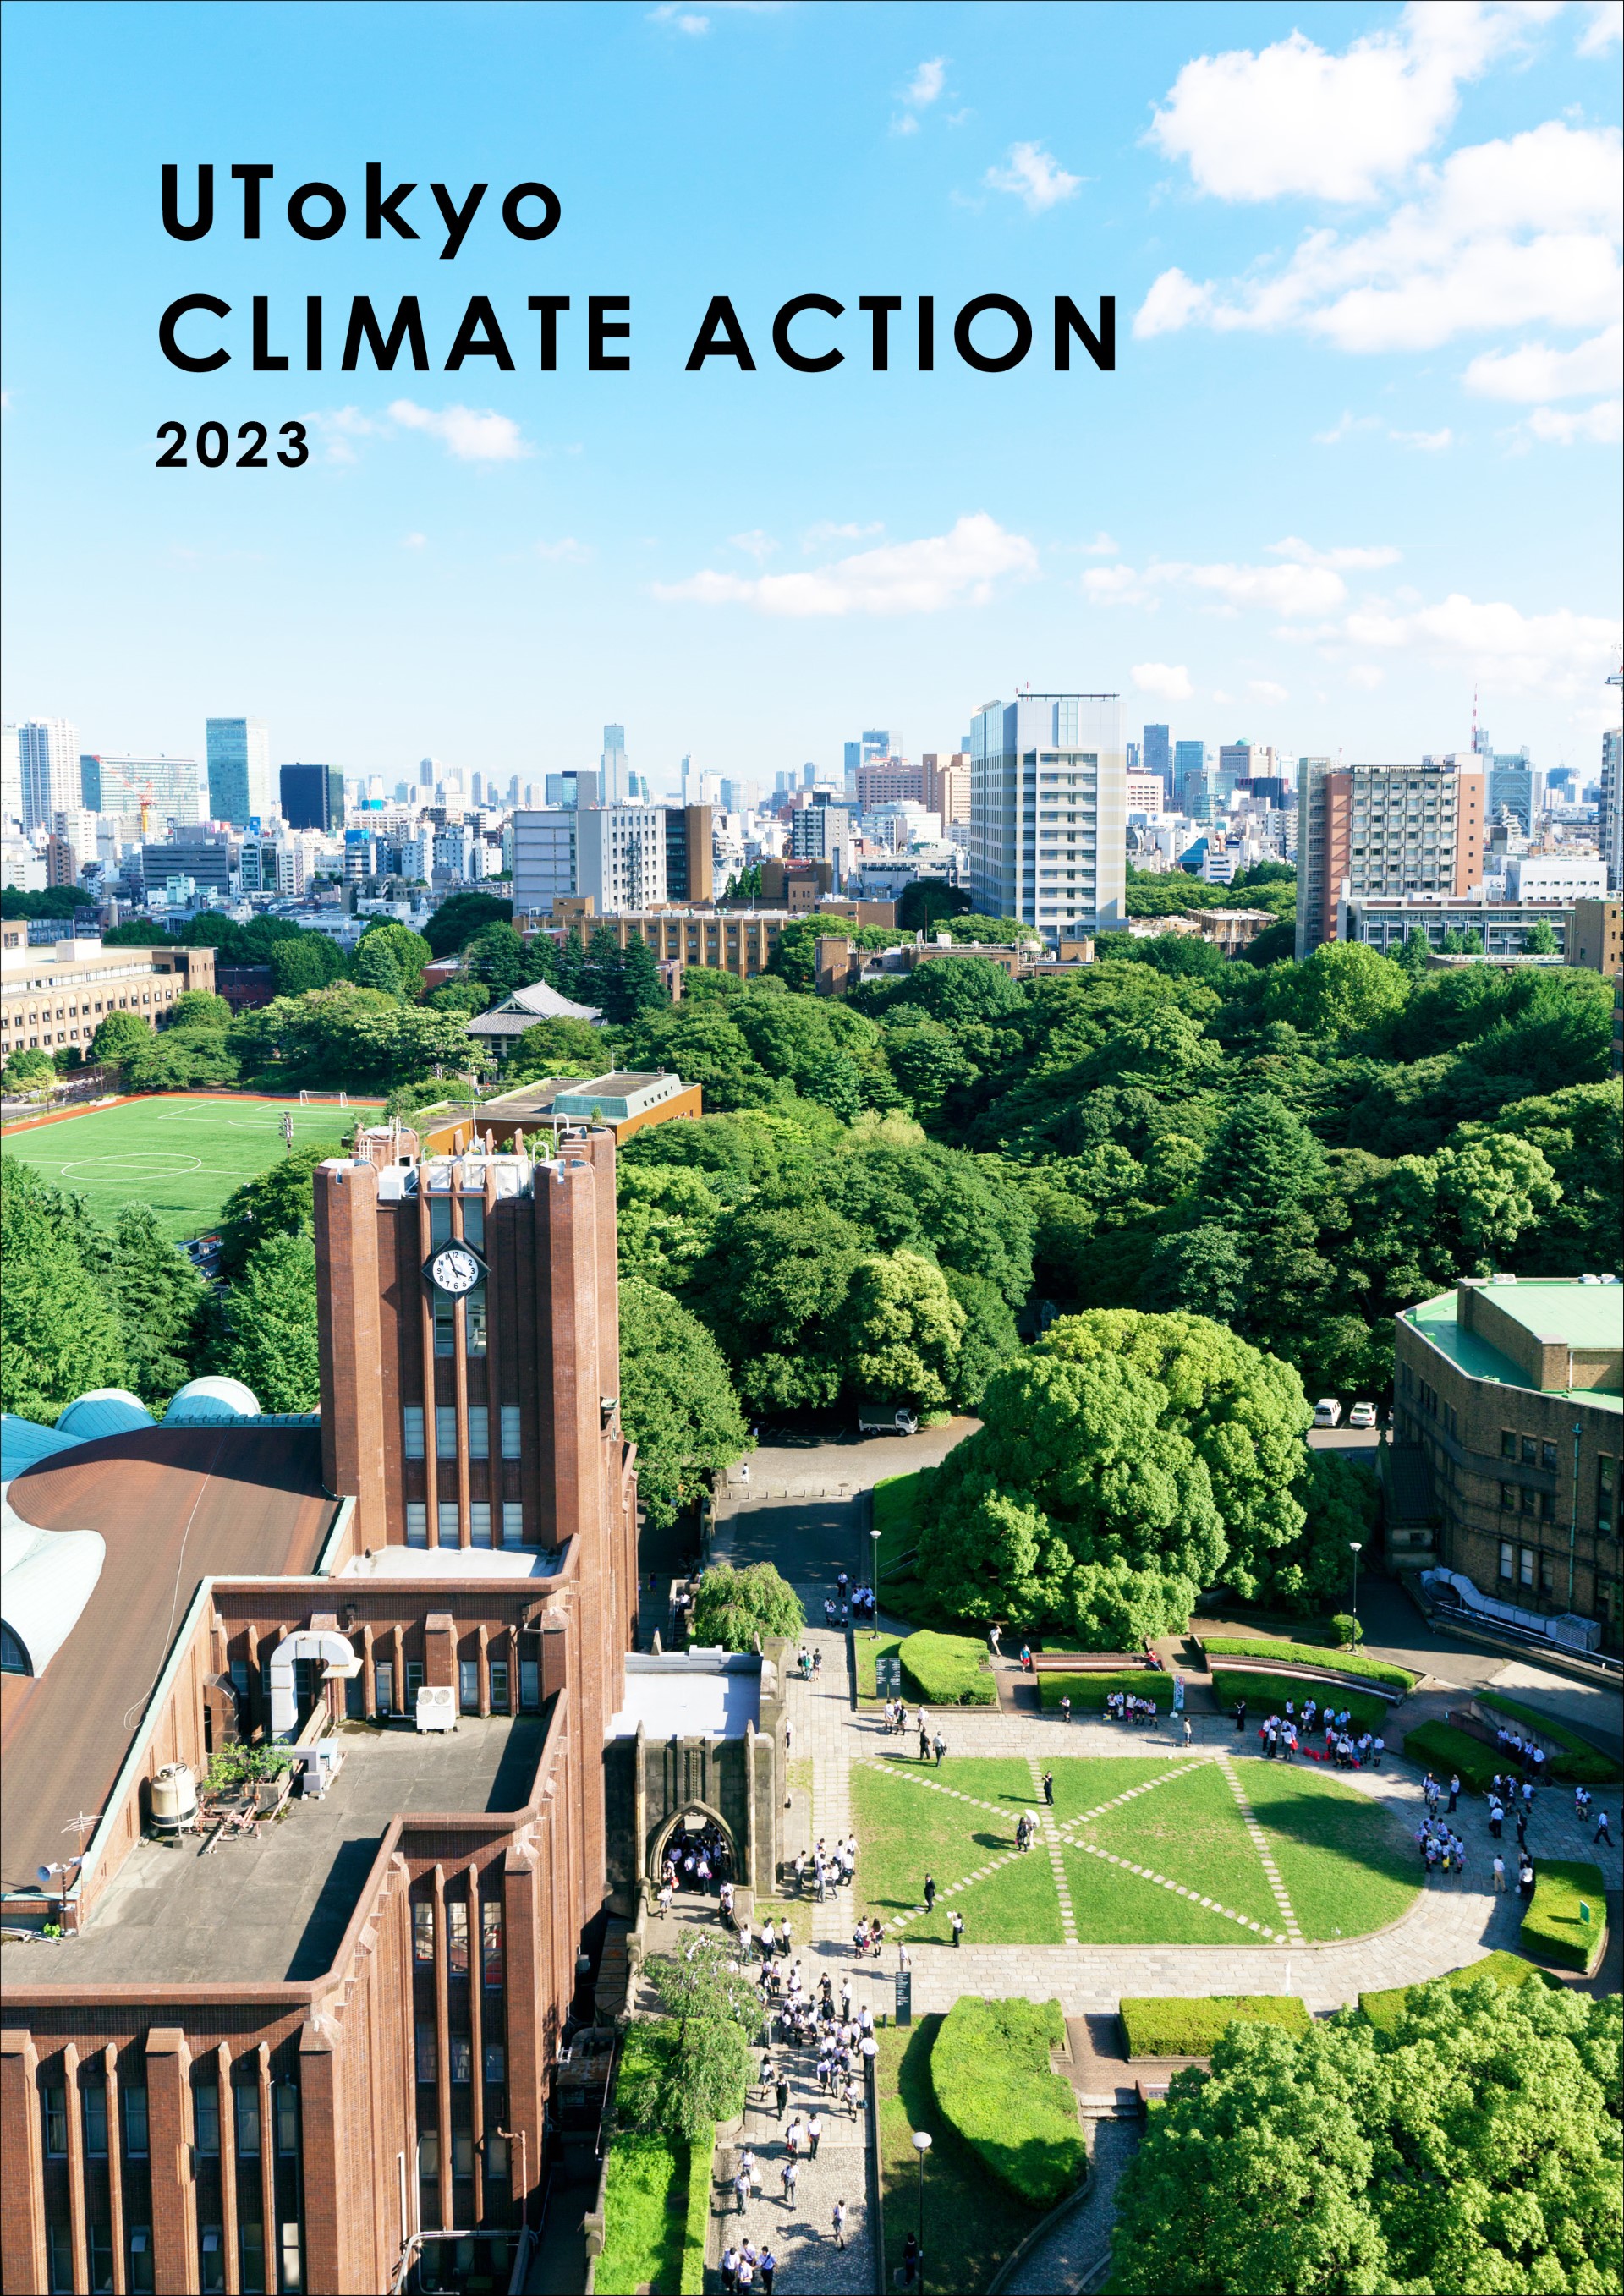 UTokyo Climate Action 2023